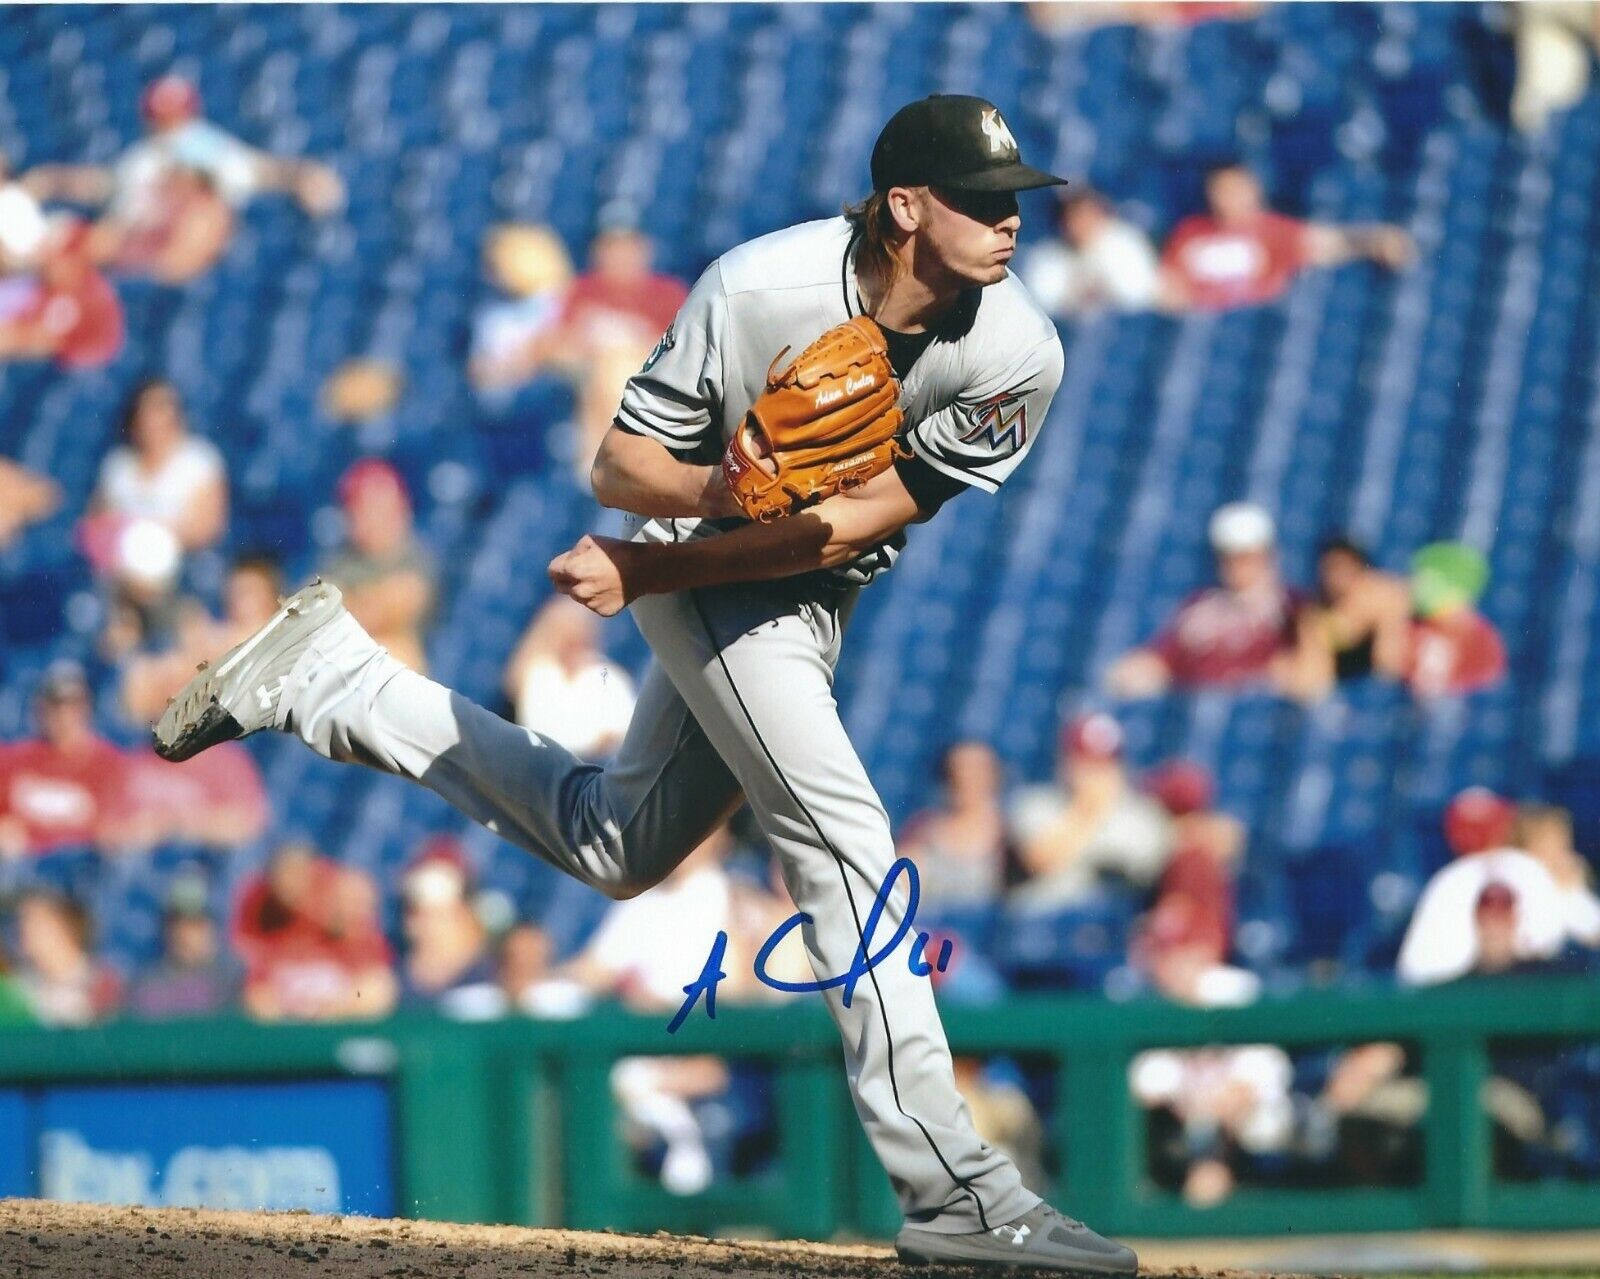 Signed 8x10 ADAM CONLEY Miami Marlins Autographed Photo Poster painting - COA